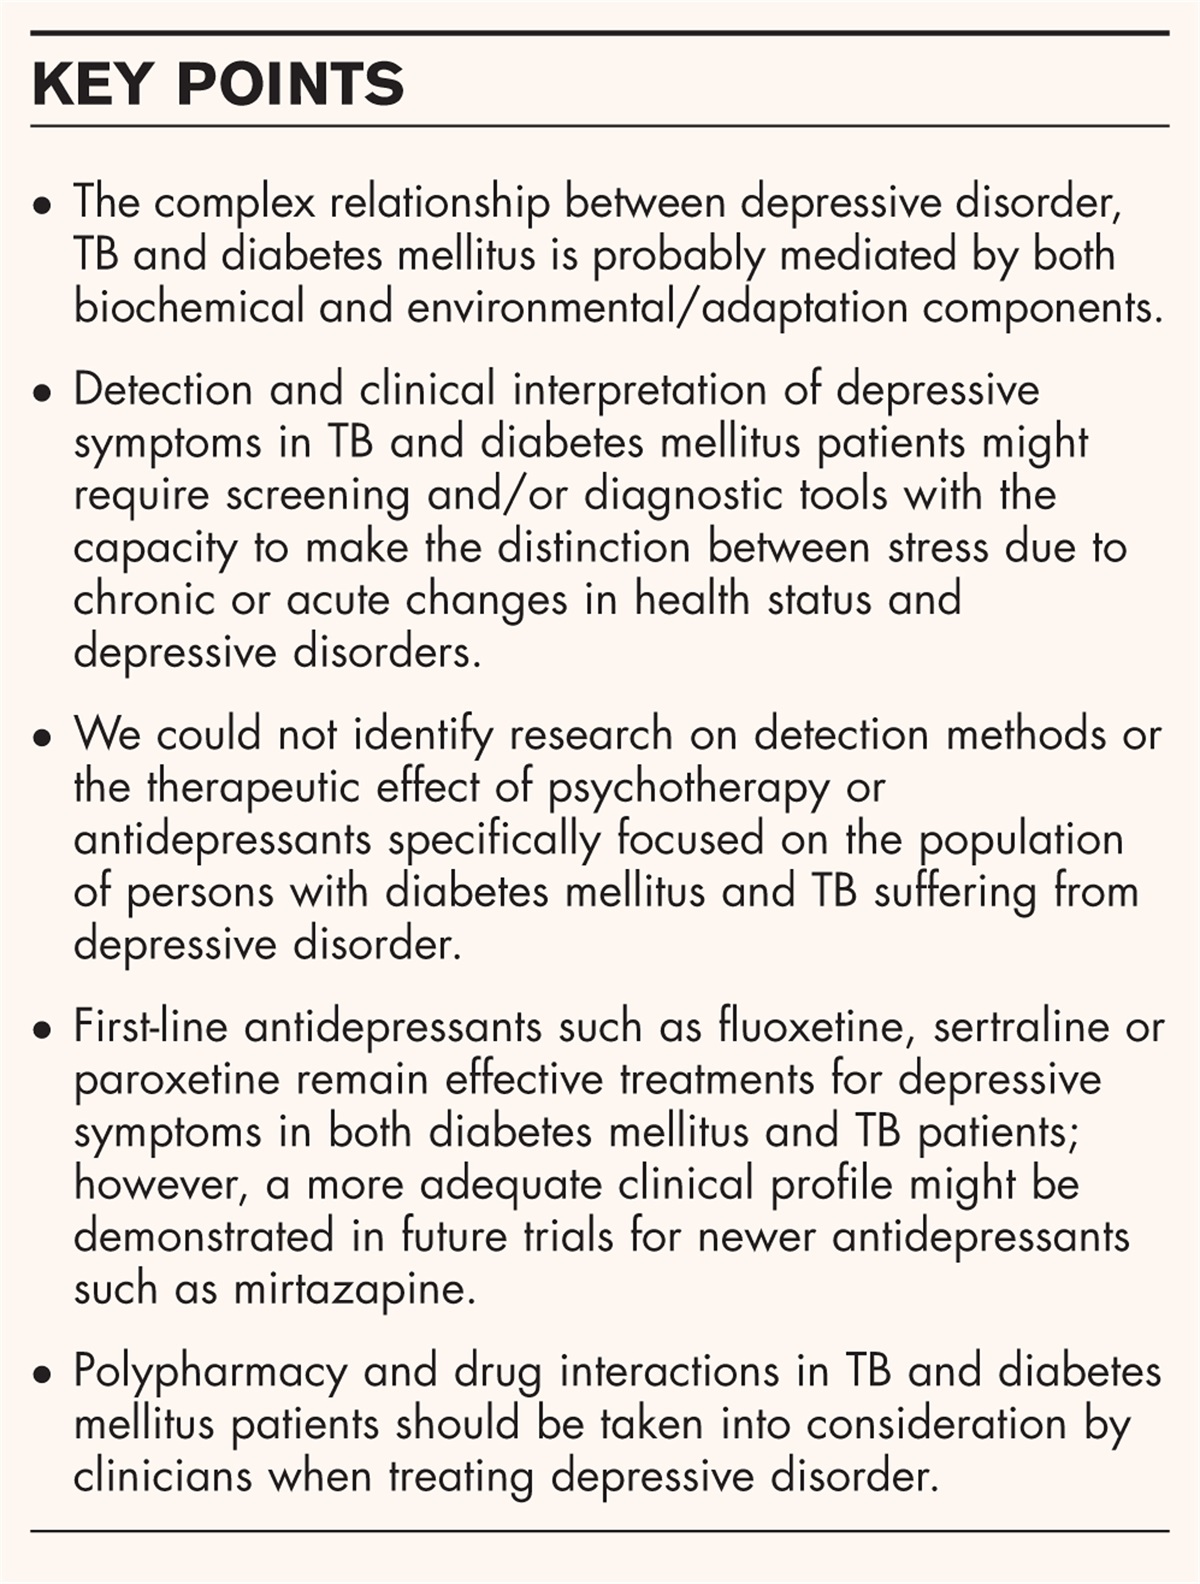 Challenges in the management of depressive disorders comorbid with tuberculosis and type 2 diabetes